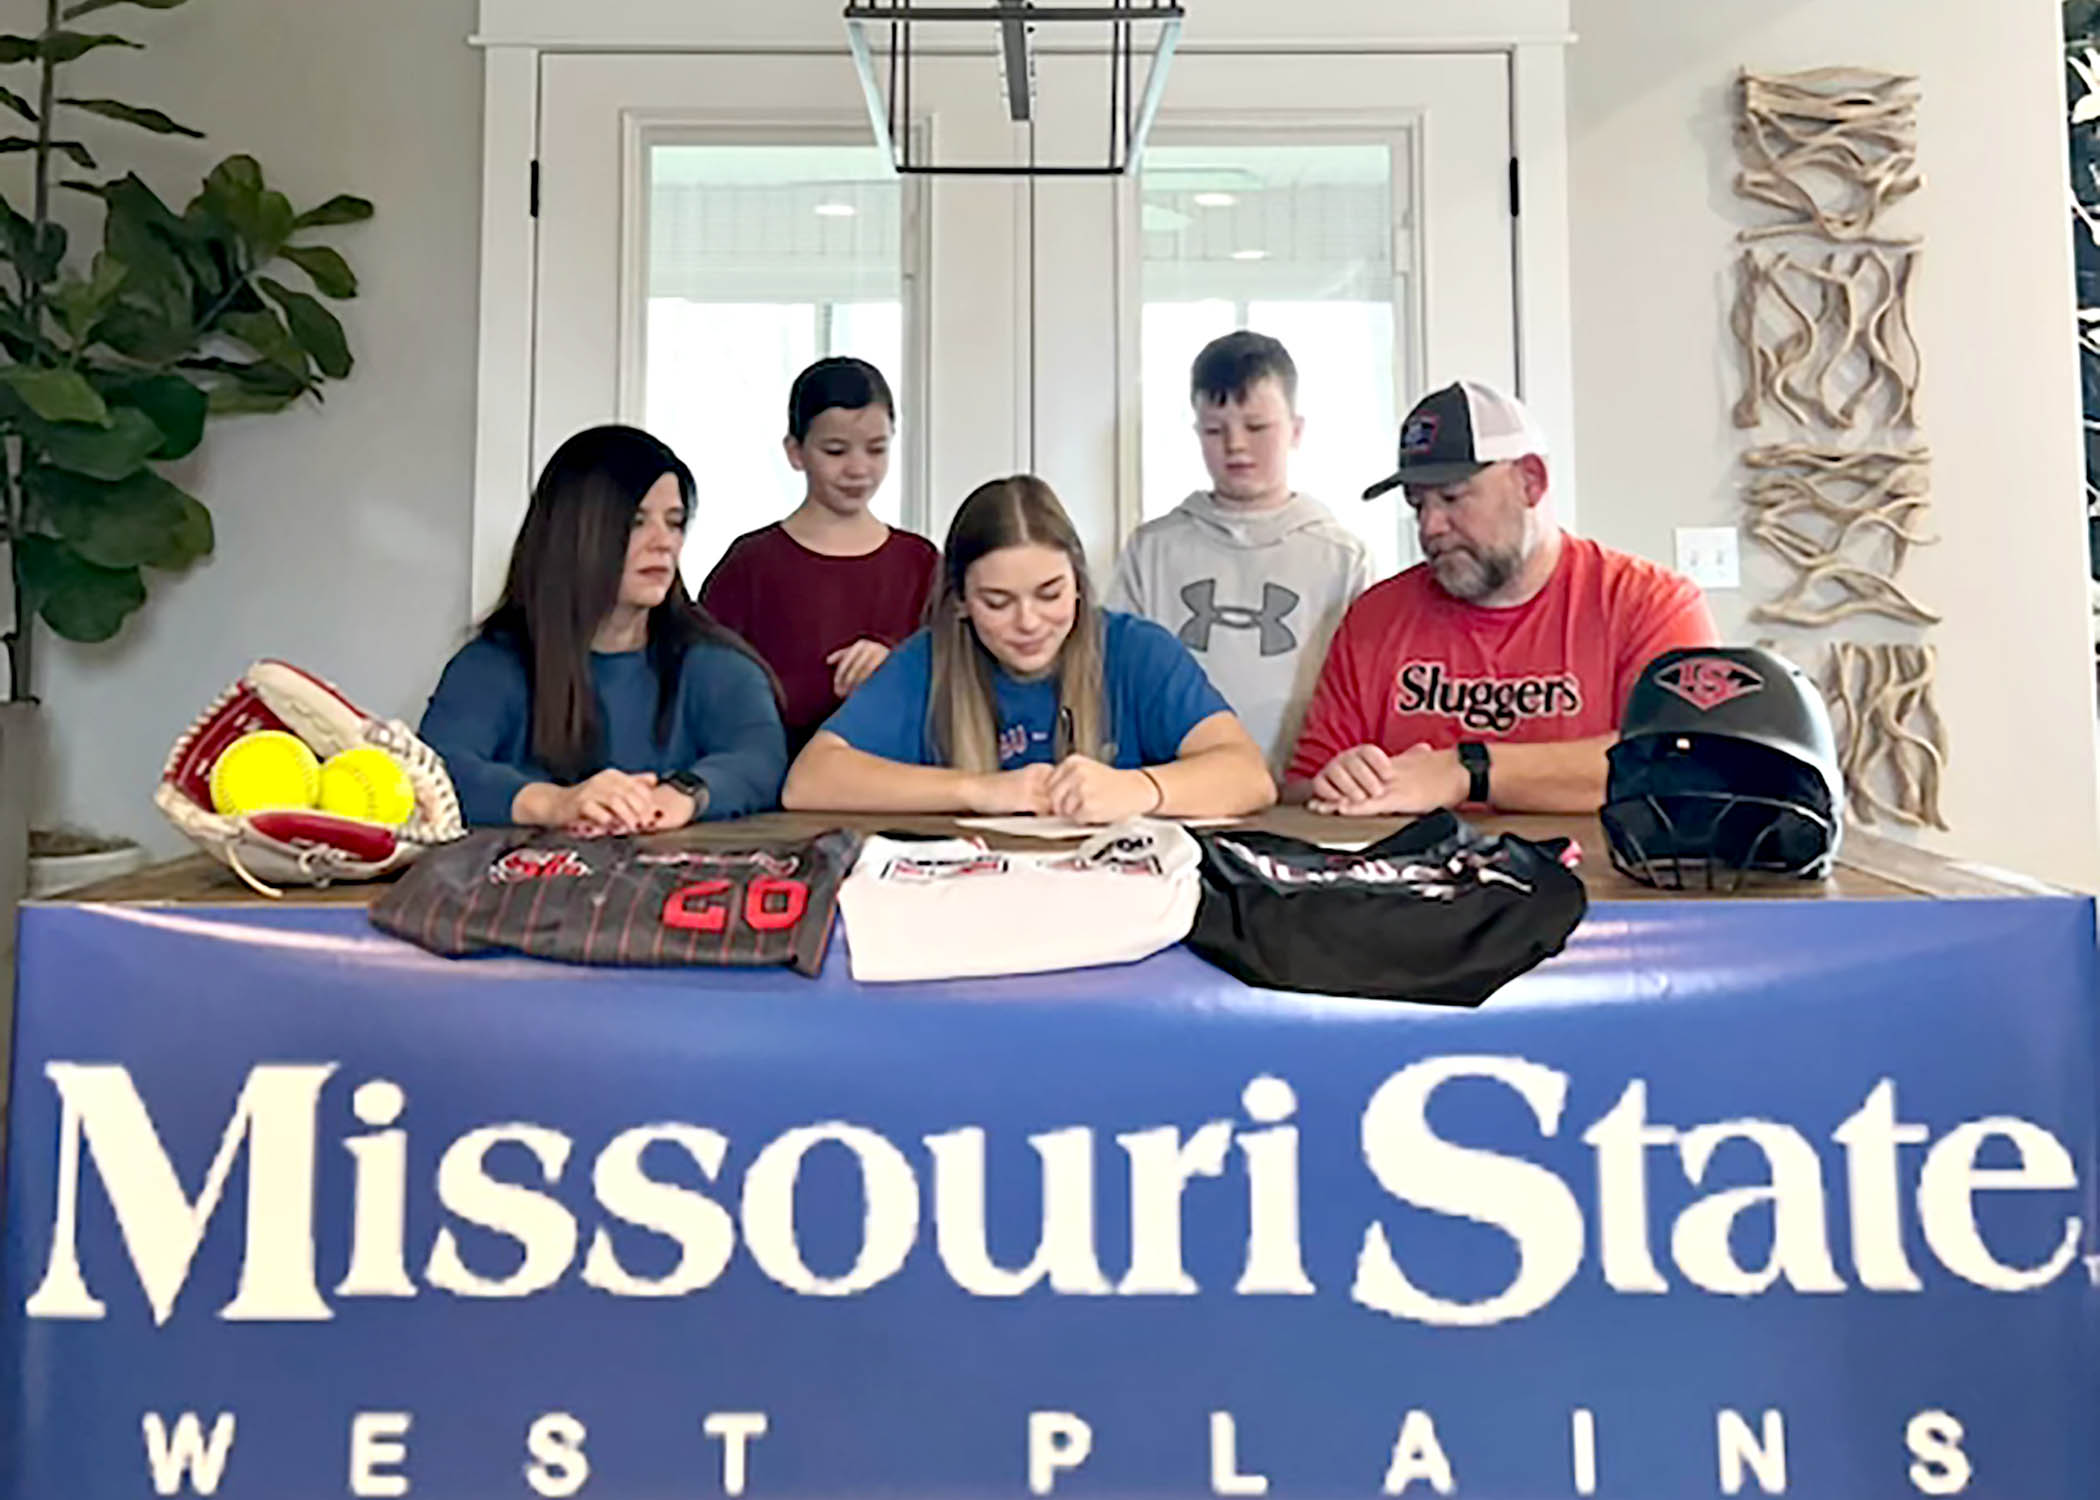 Maddie Saul, seated center, signs her letter of intent to play for the Grizzly Softball team beginning in fall 2024. Looking on are her parents, Alison and Steve, and her siblings, Ava and Alex.